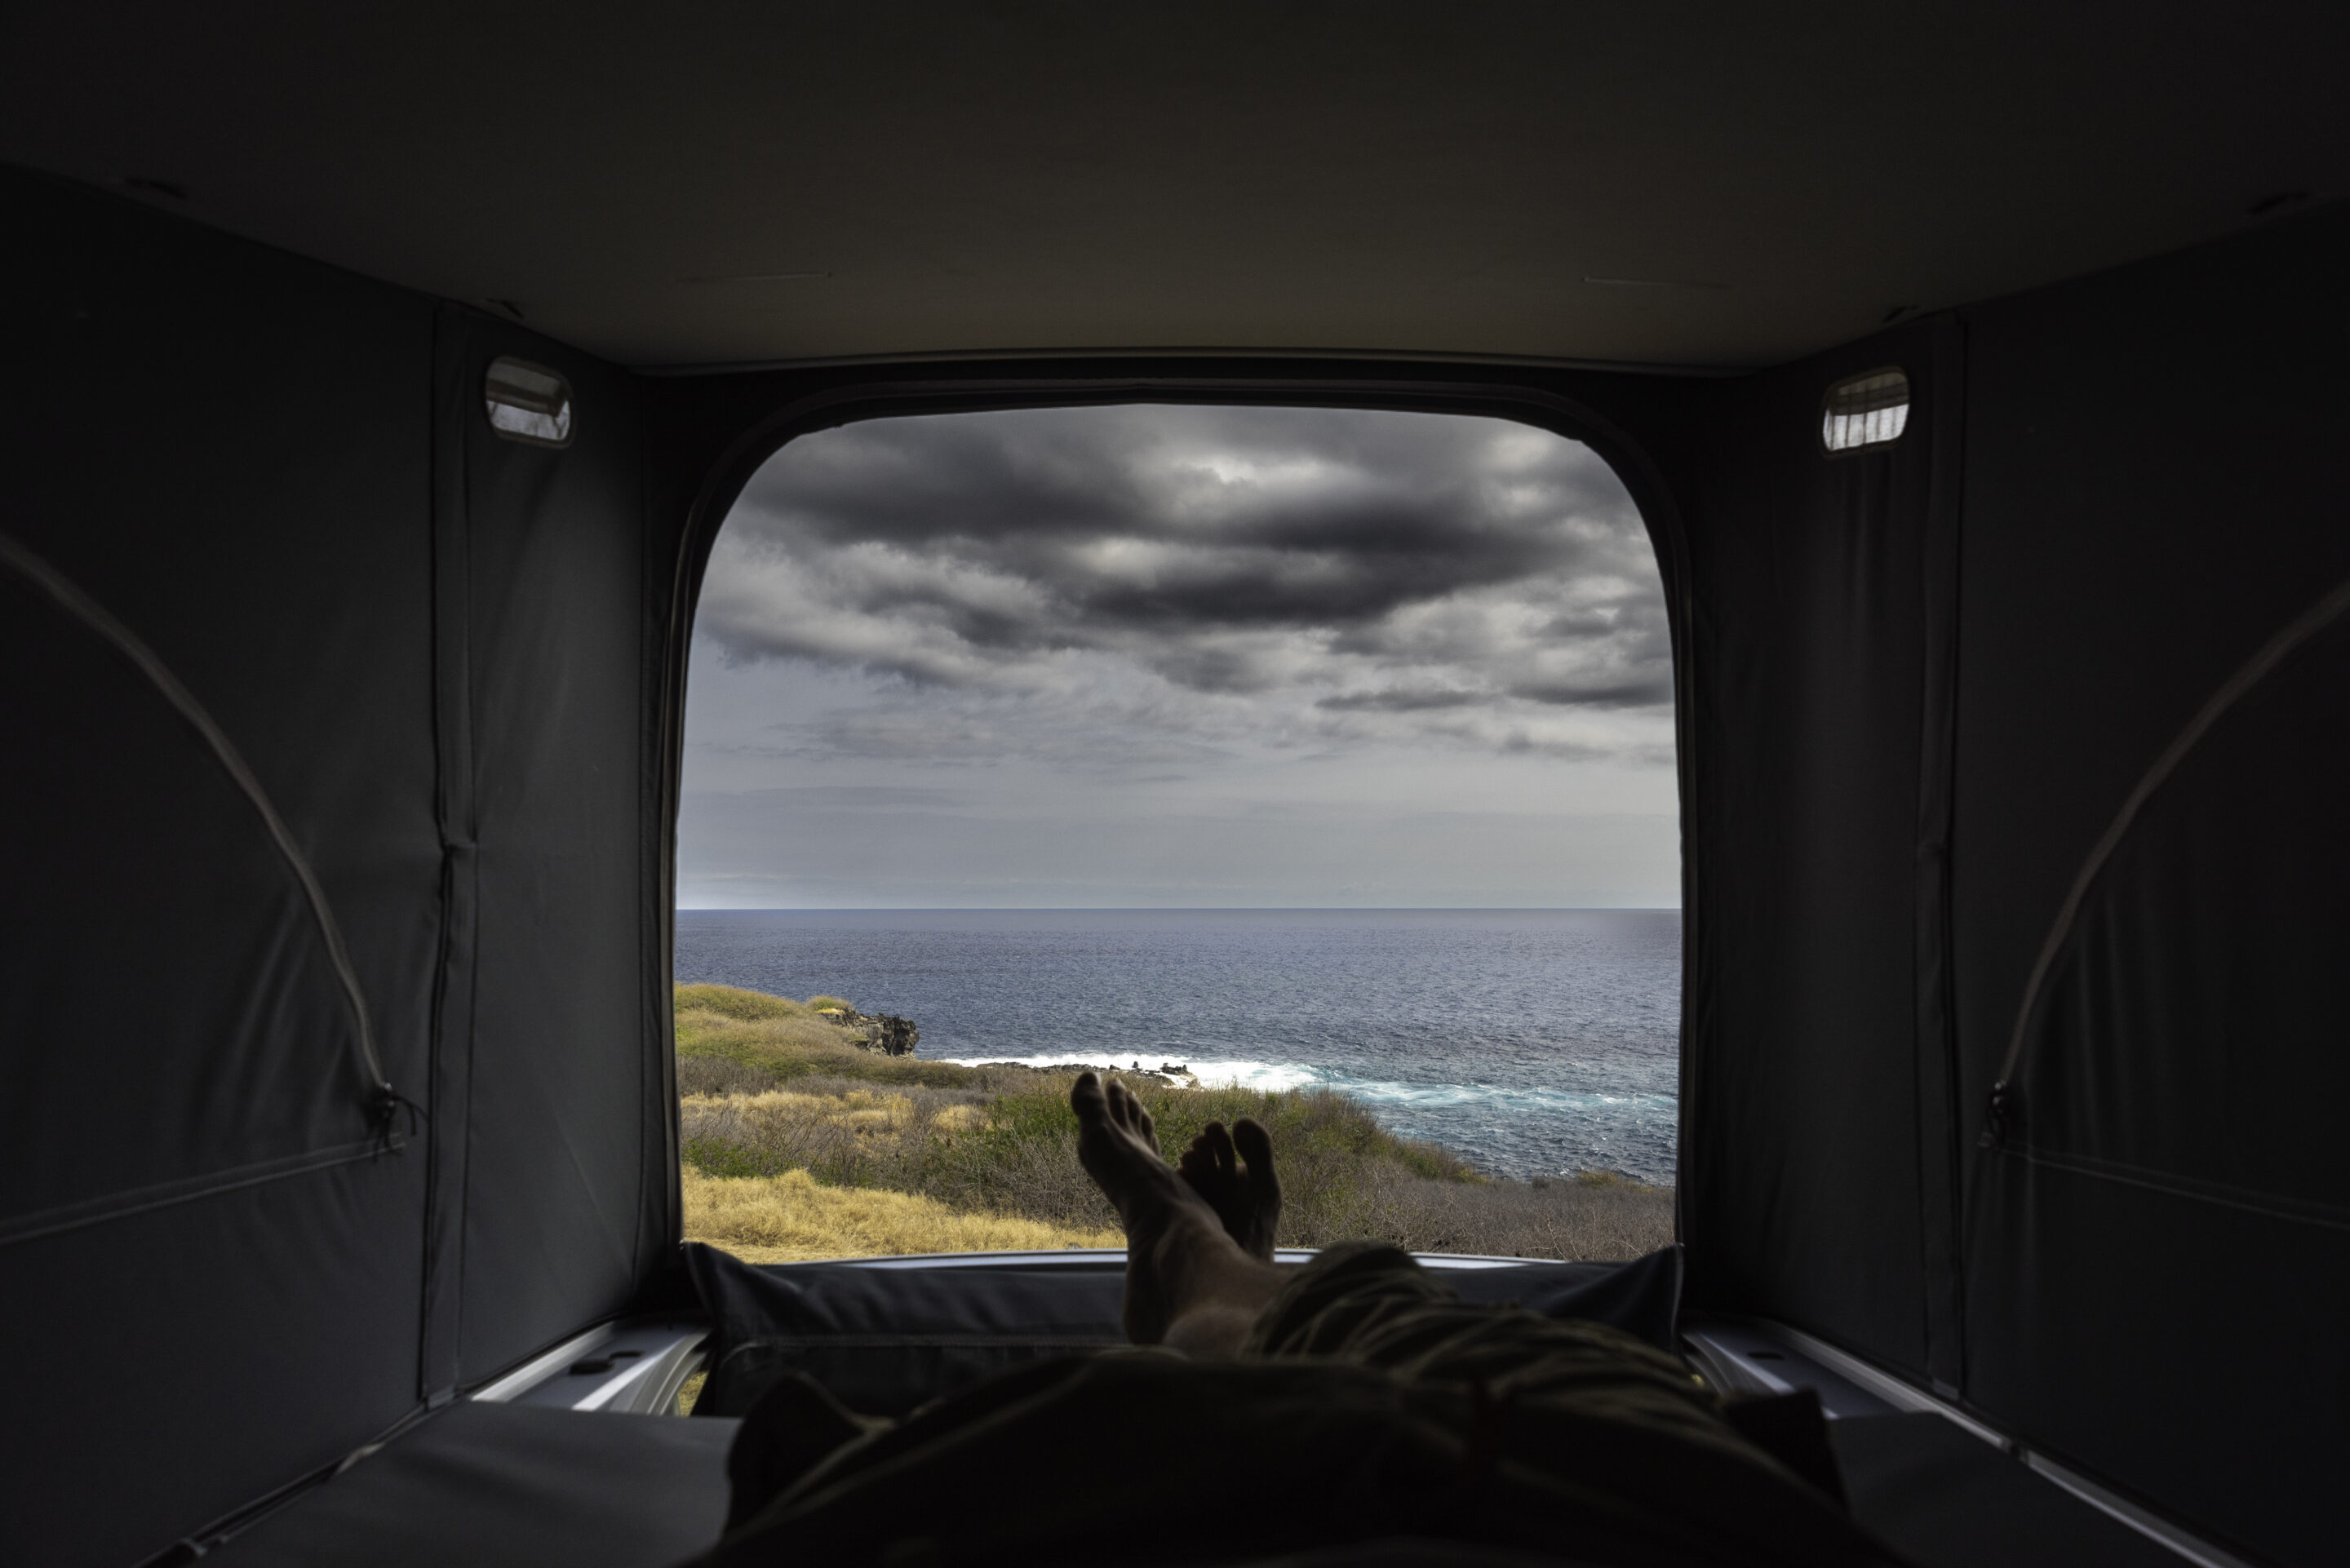 Camping in a van on Reunion Island: Legislation favorable to escapism